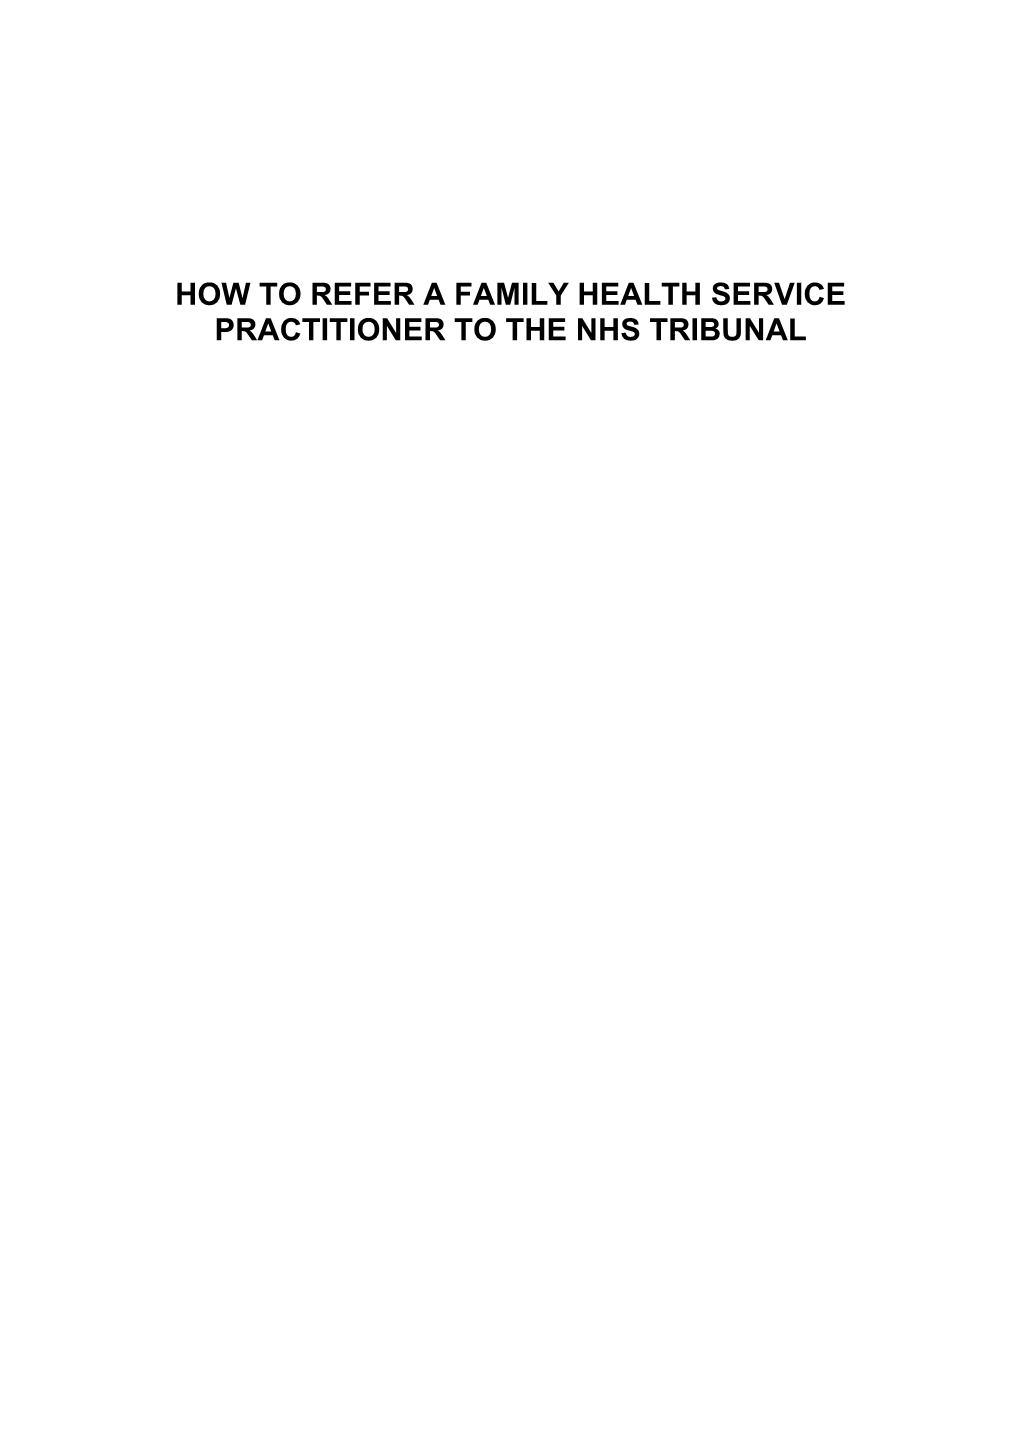 How to Refer a Family Health Service Practitioner to the Nhs Tribunal